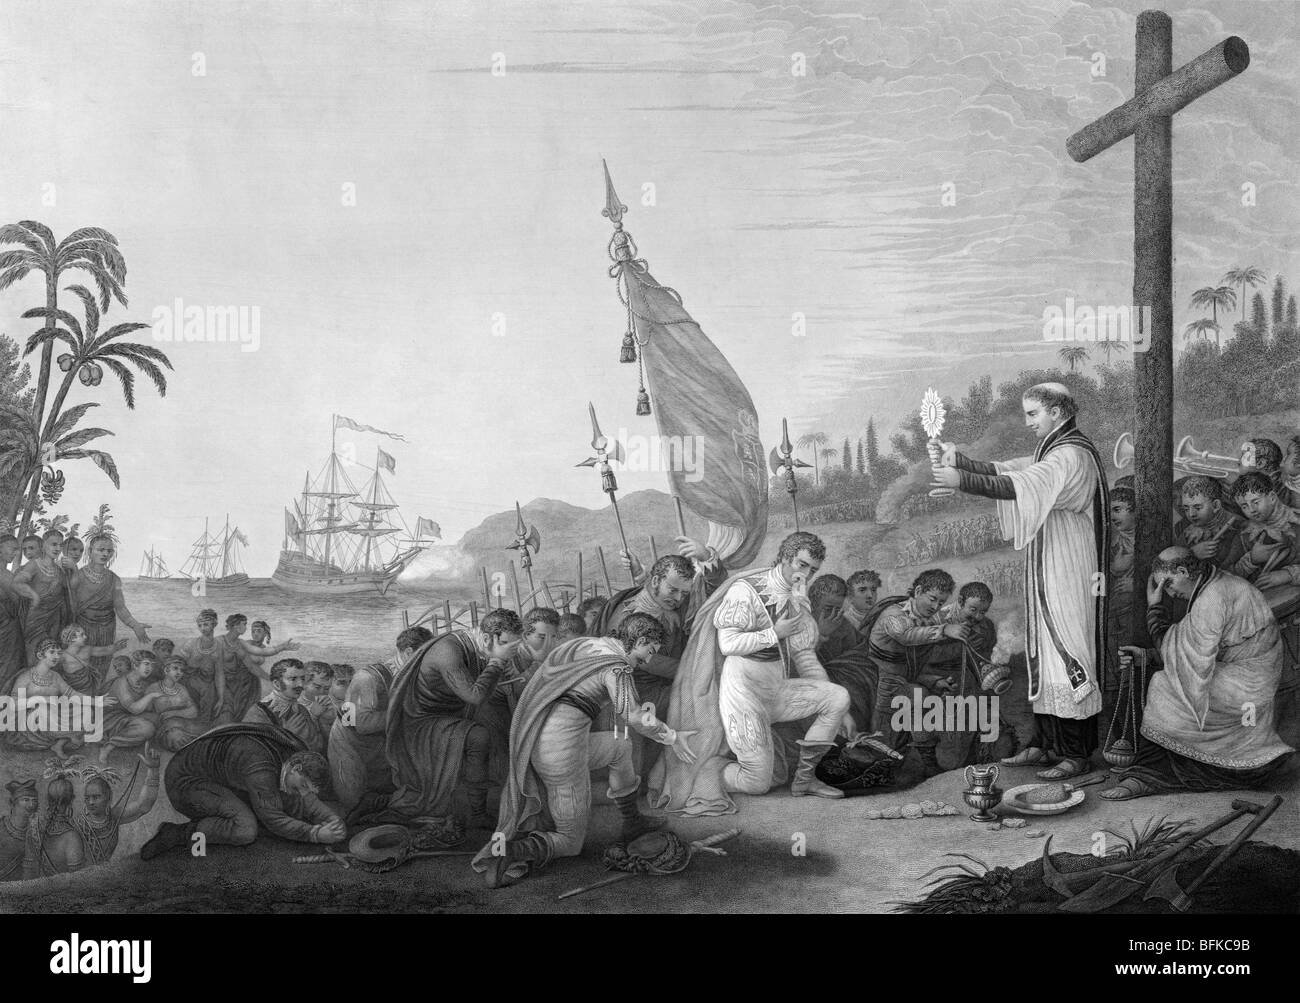 Print c1876 showing Christopher Columbus and crew praying after landing in the New World for the first time on October 12 1492. Stock Photo